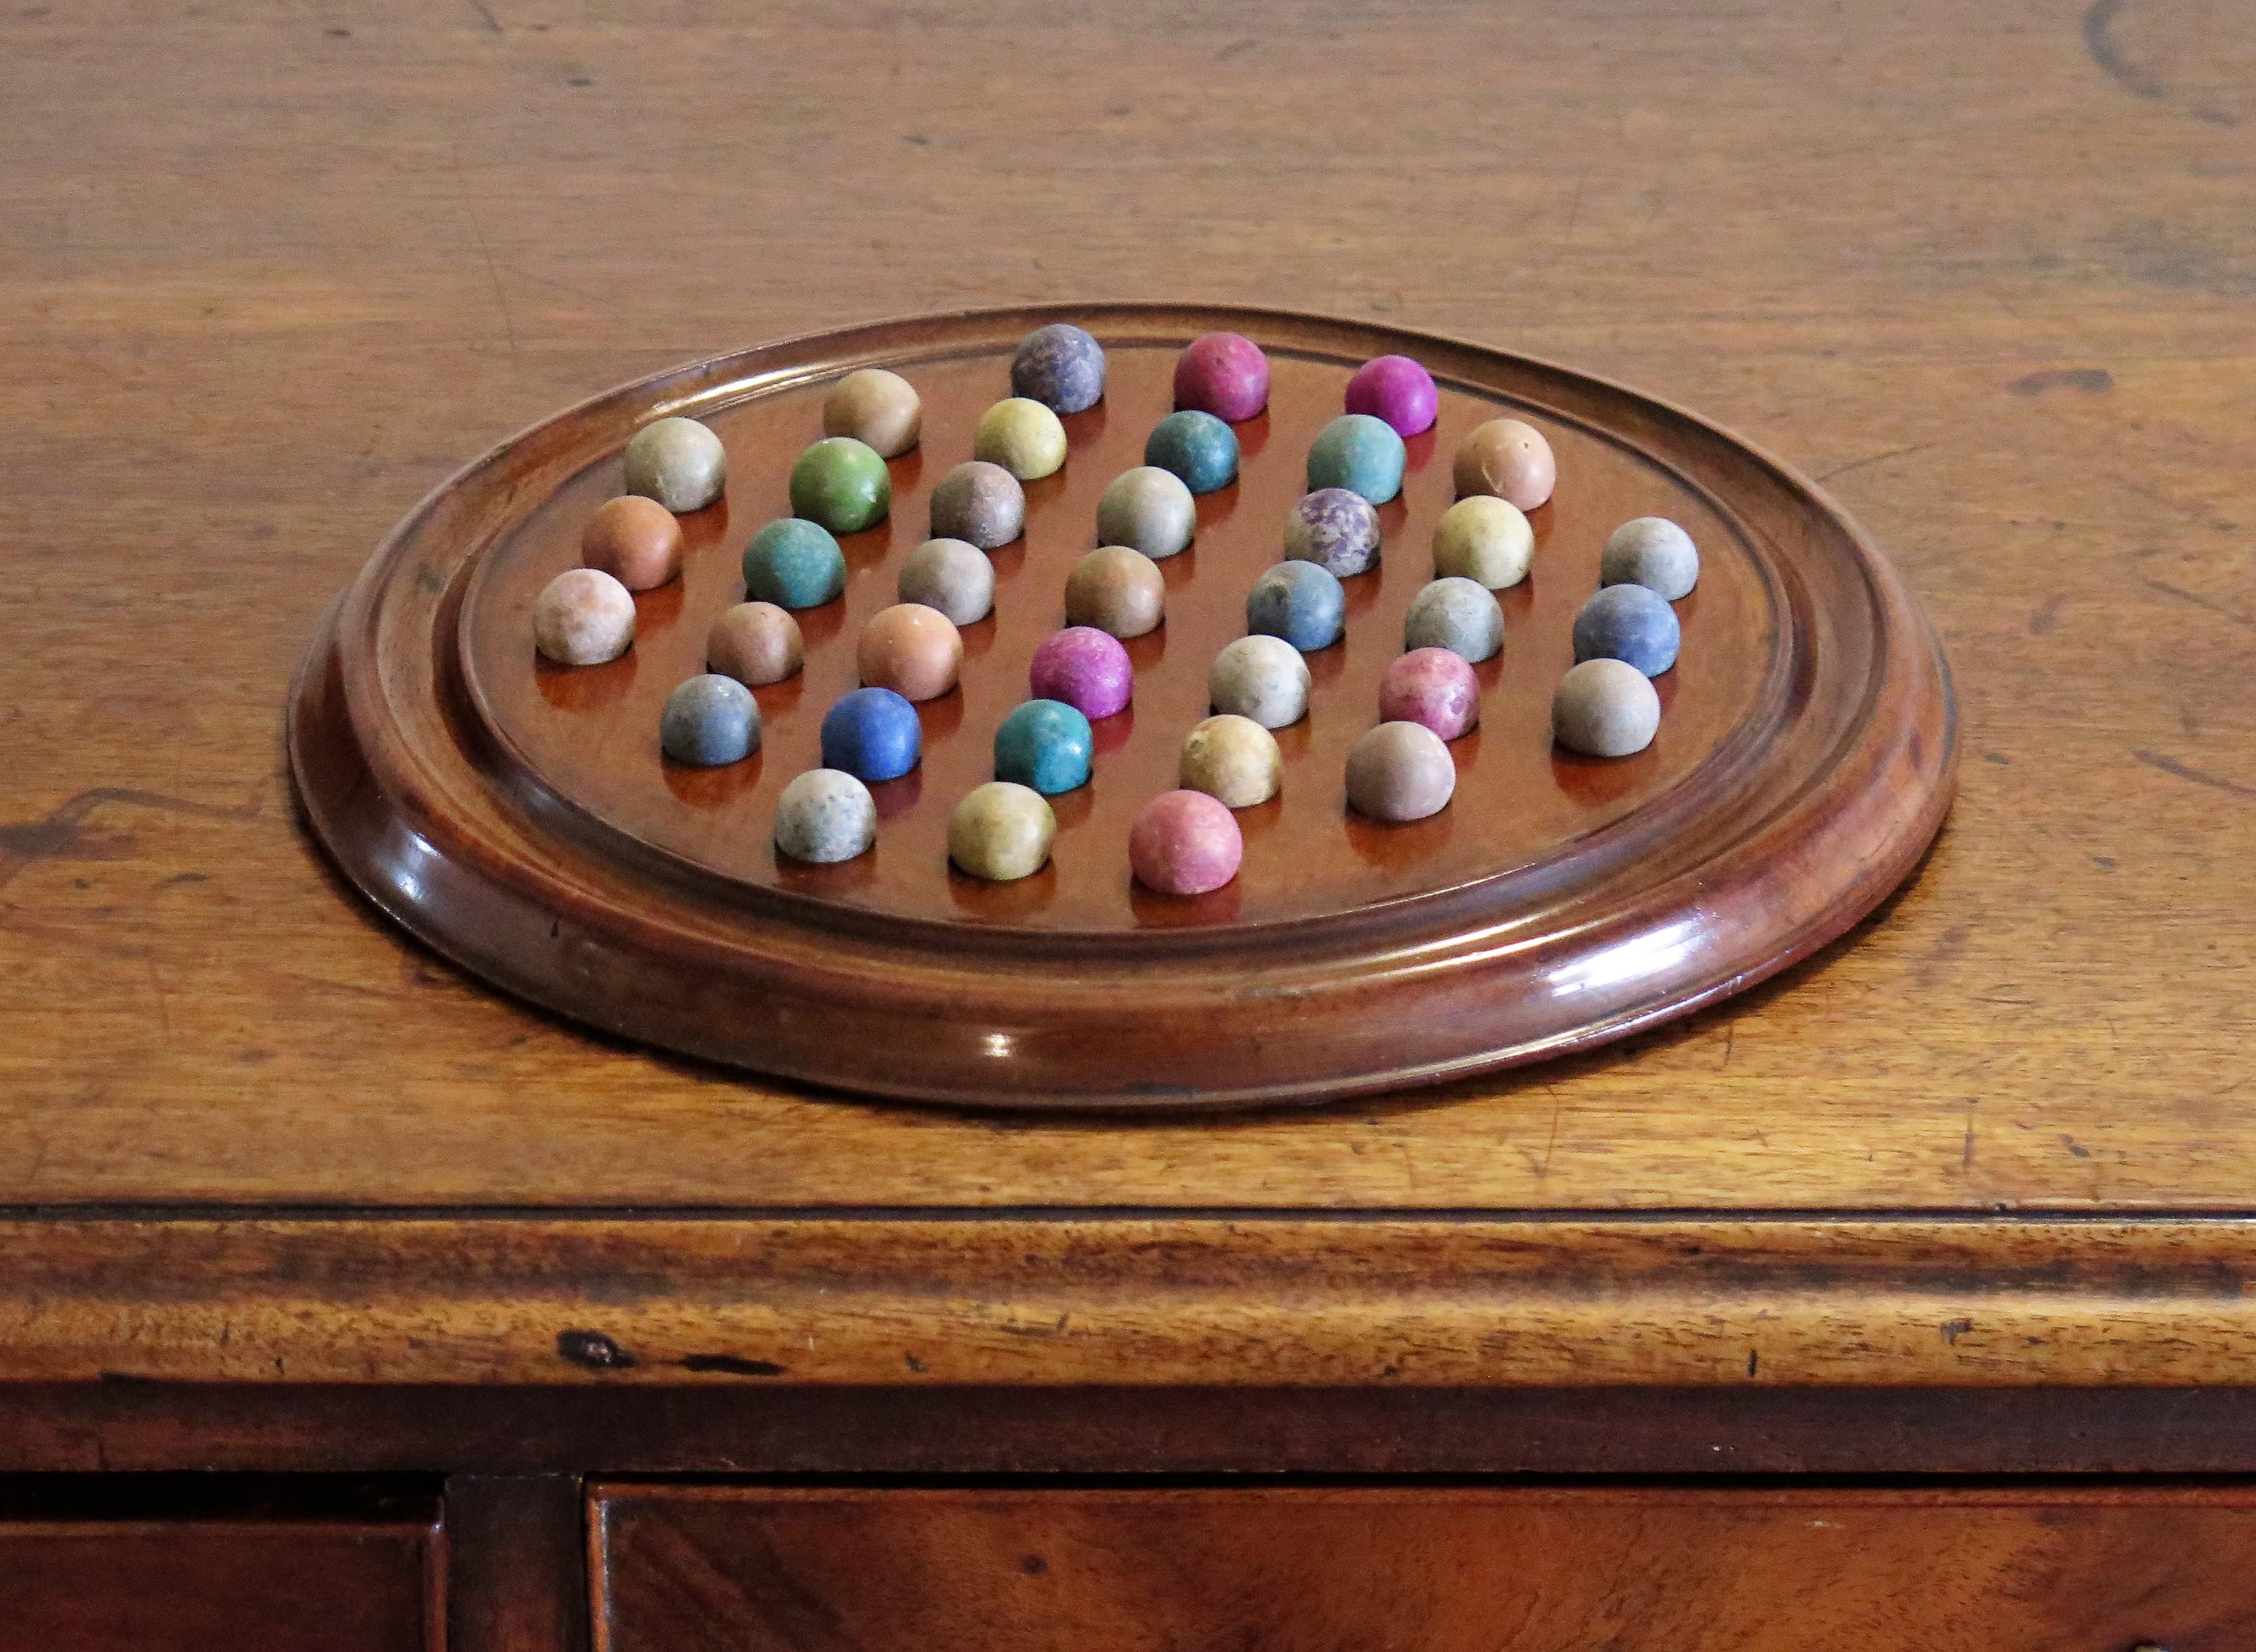 Marble Solitaire Game Mahogany Board 37 Handmade Clay /Stone Marbles 8